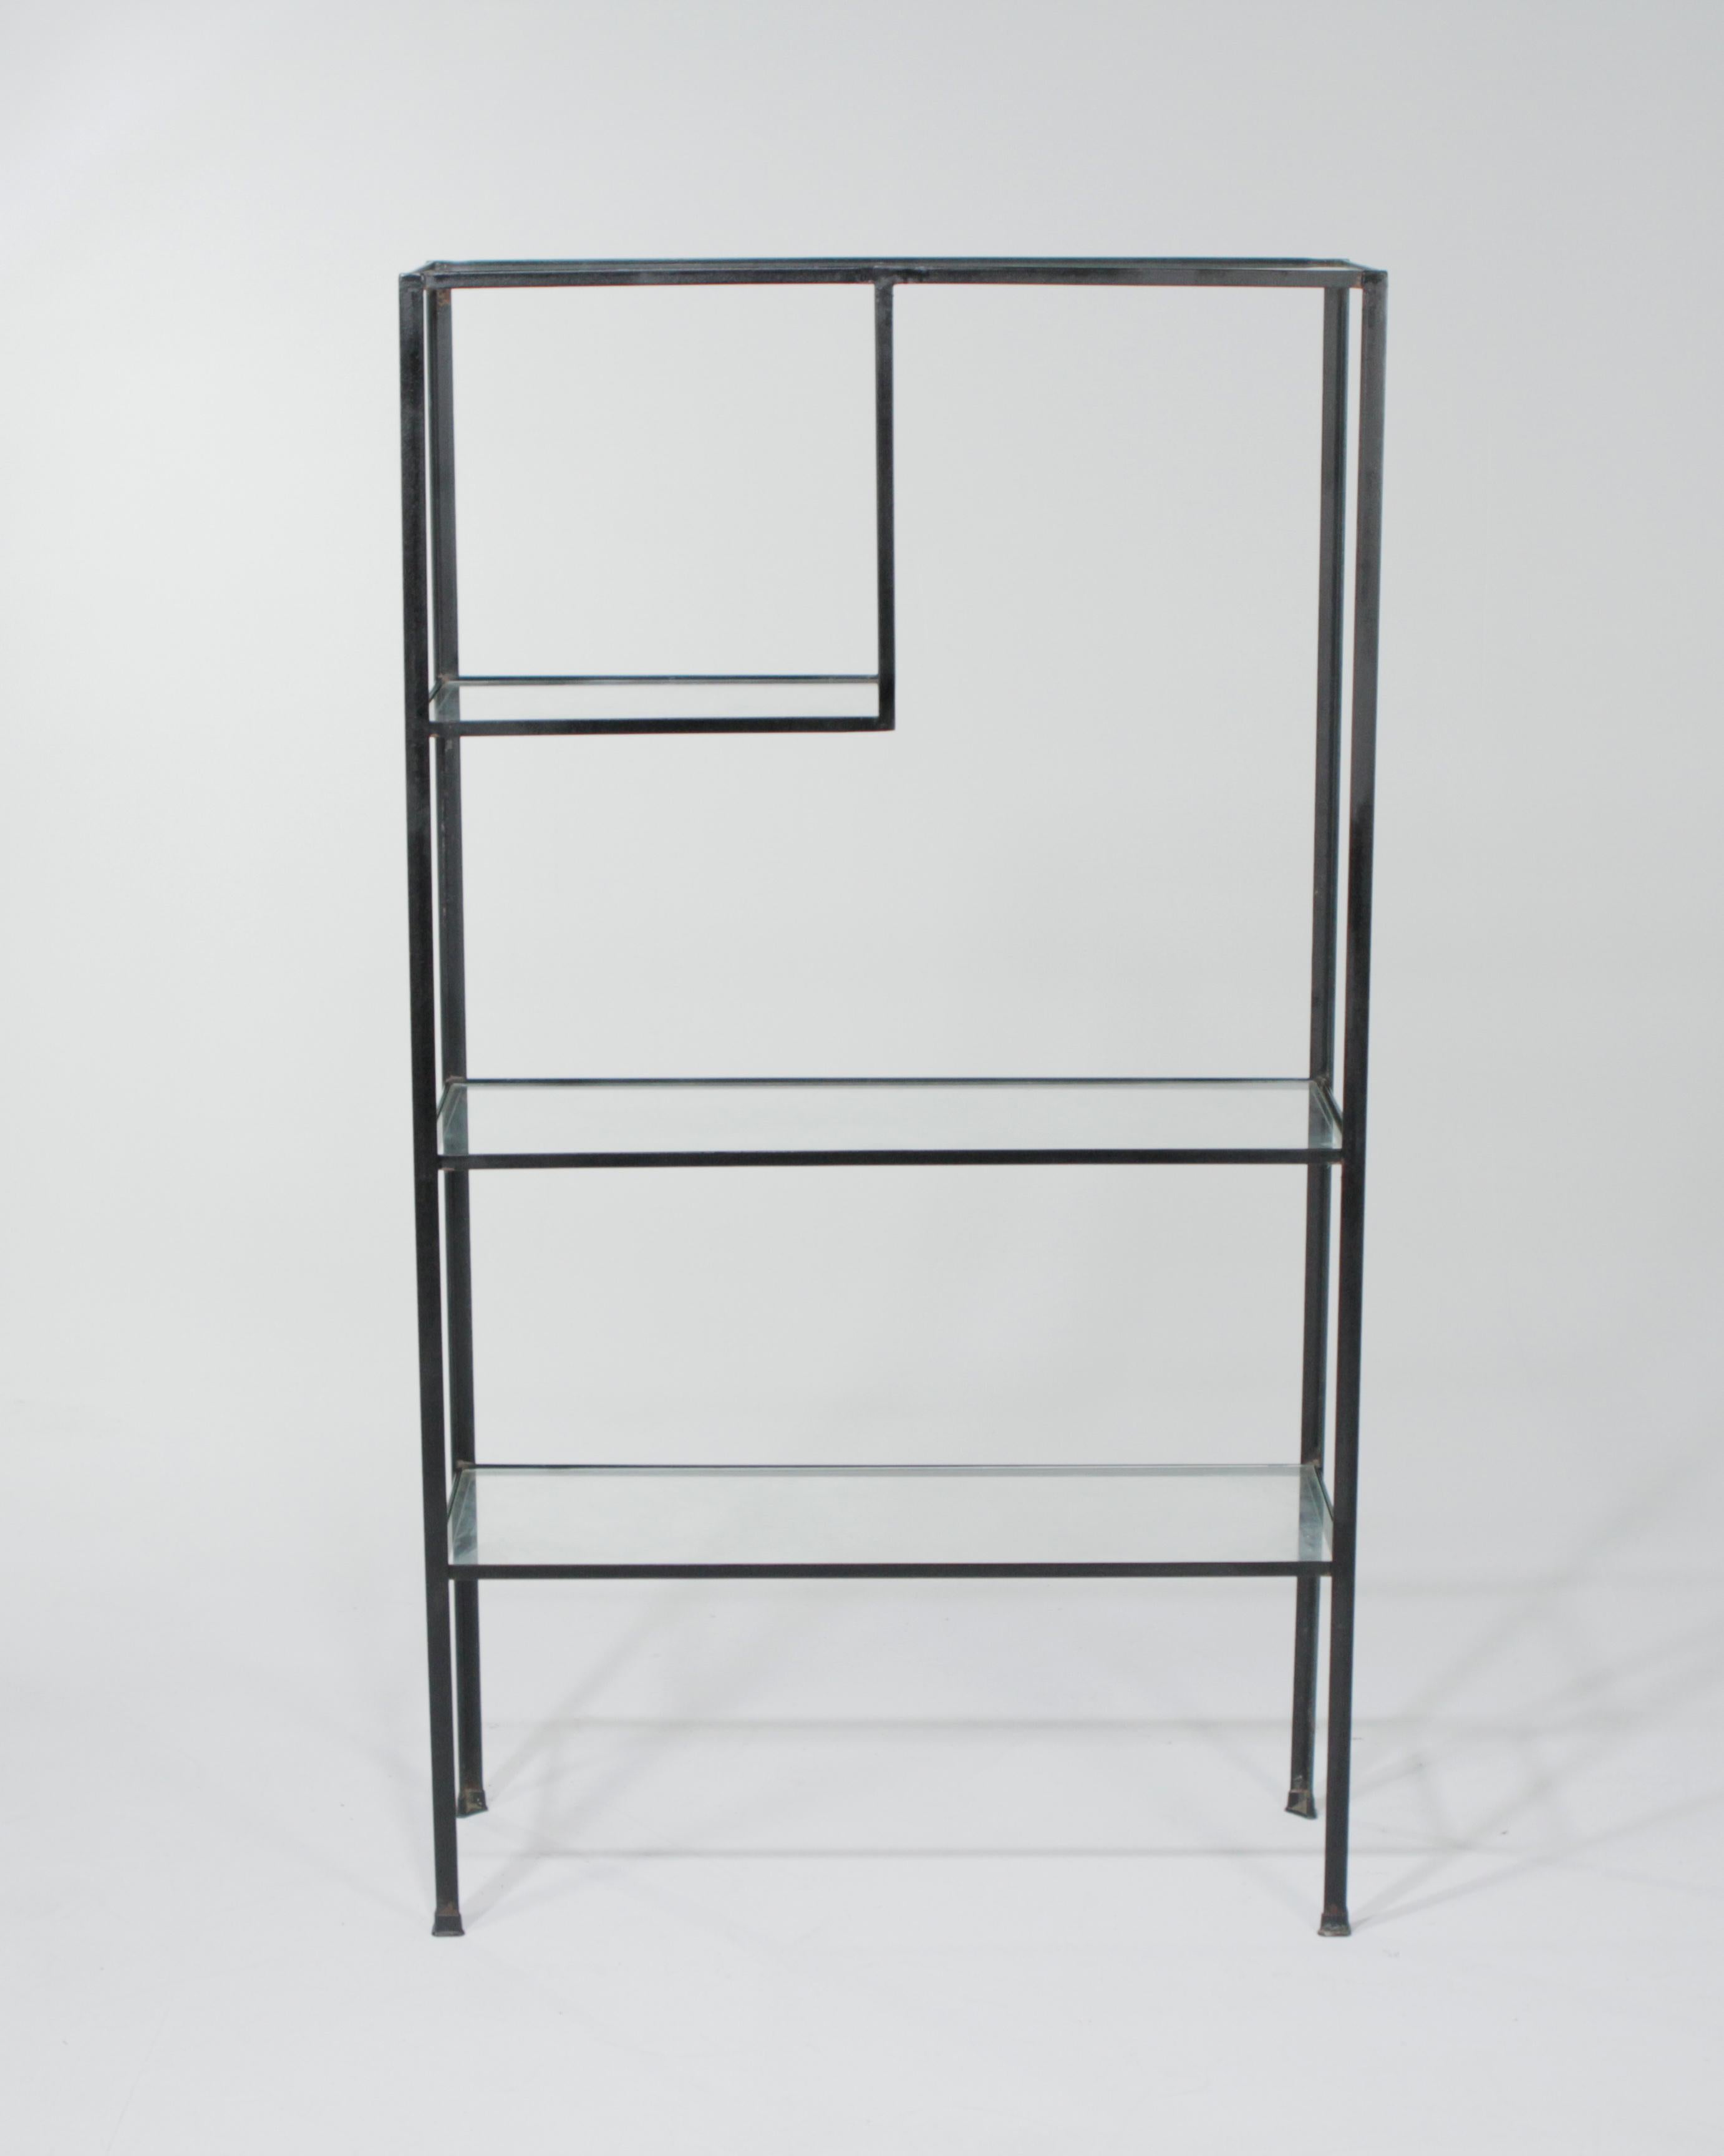 1950s Frederick Weinberg midcentury angle iron shelf unit. This is the shorter version of the well known Frederick Weinberg shelf that has a built in lamp.
  